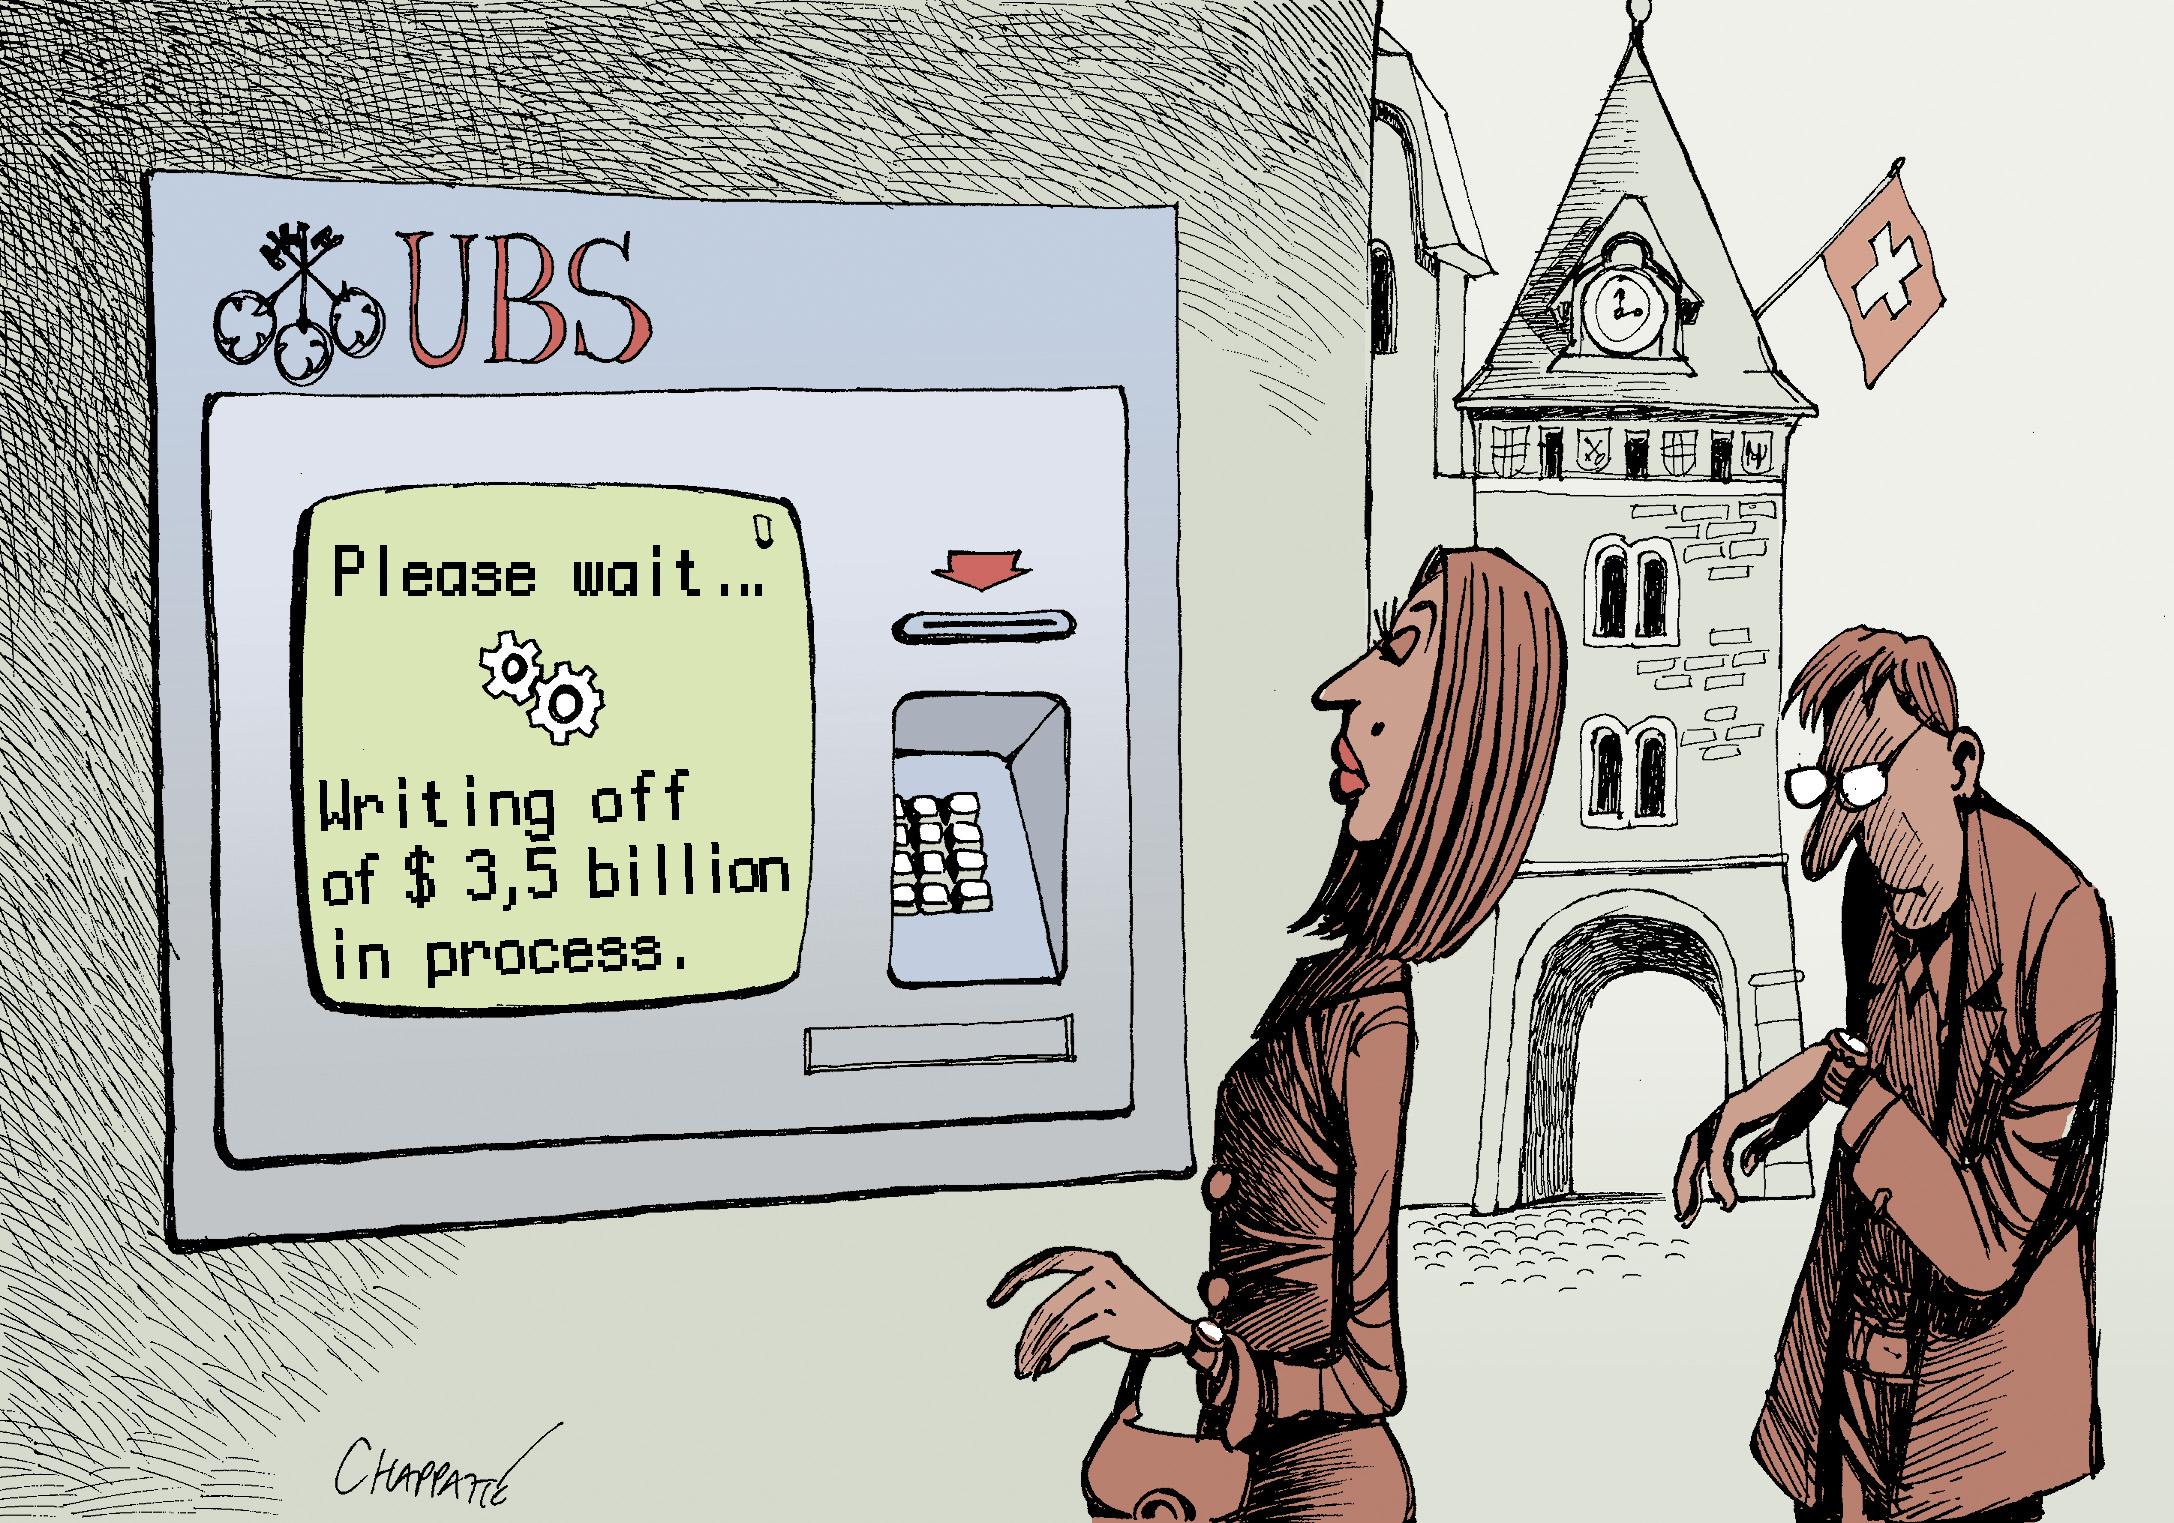 UBS hit by subprime crisis